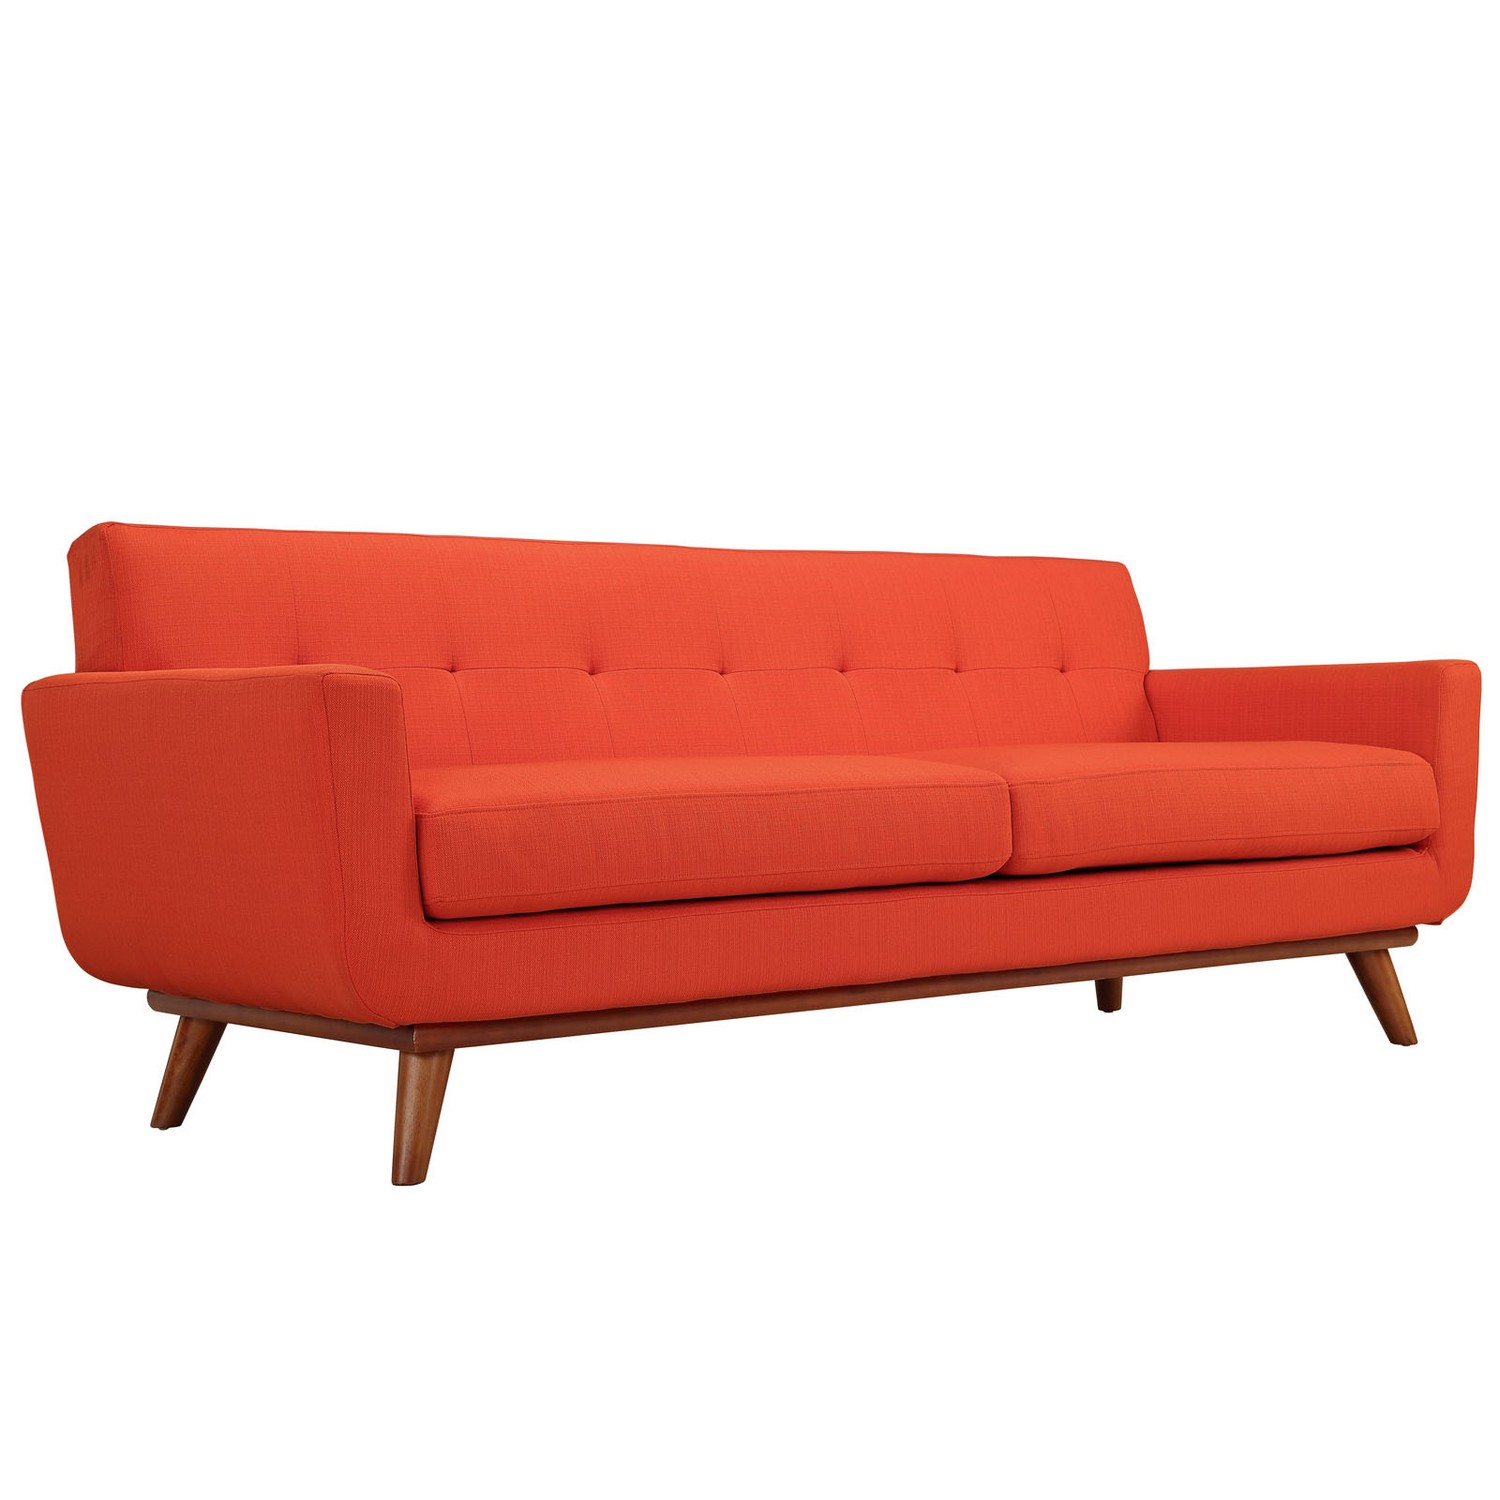 Modway Engage Upholstered Sofa - Atomic Red